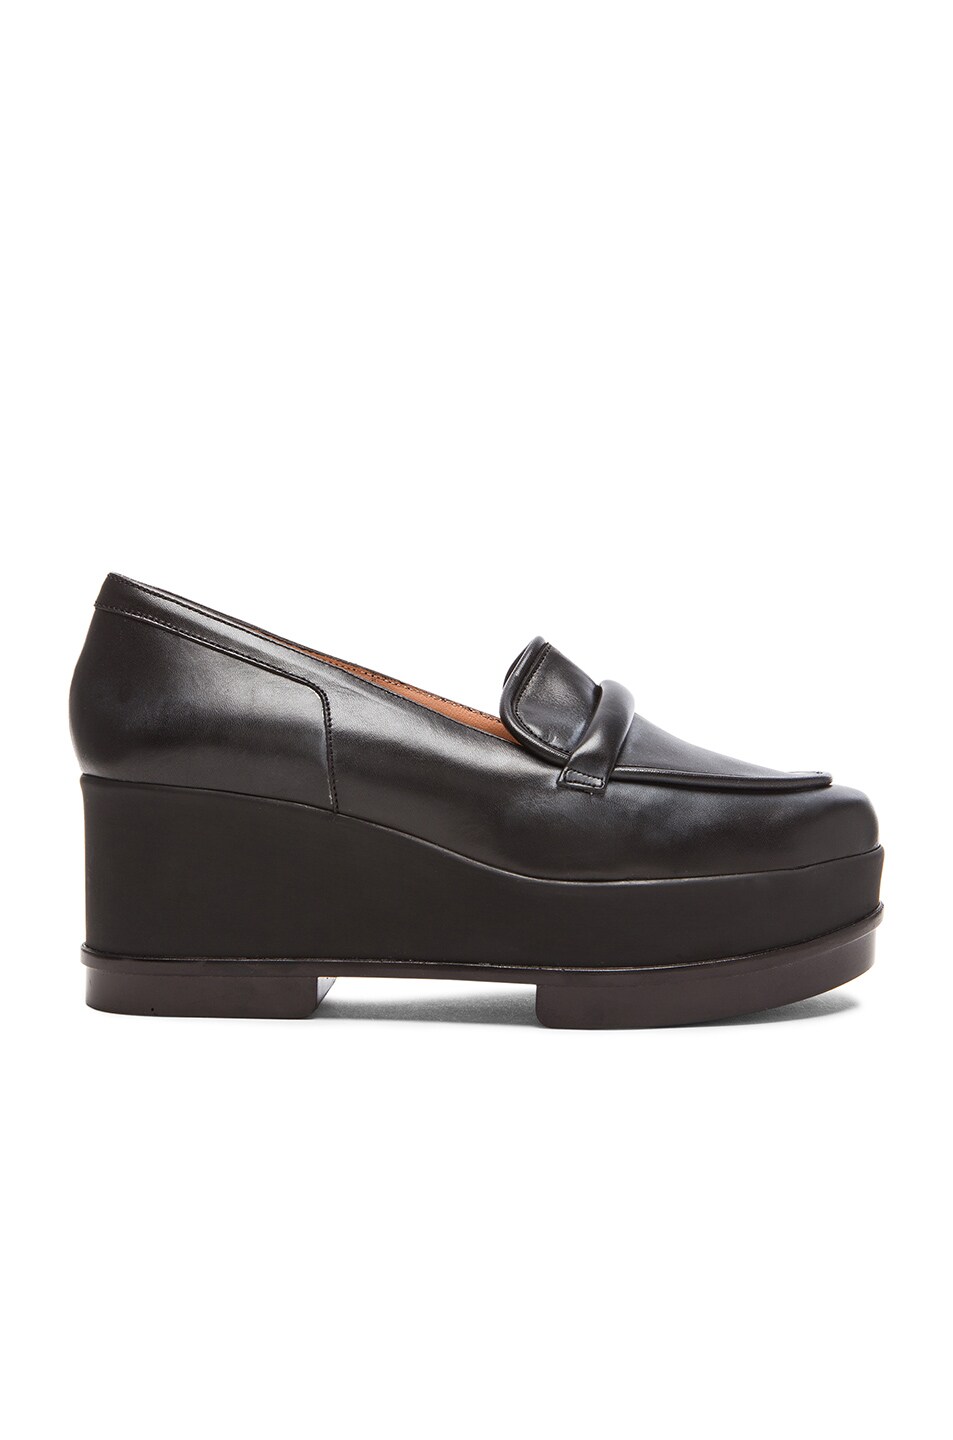 Image 1 of Robert Clergerie Yoko Leather Loafers in Black Leather